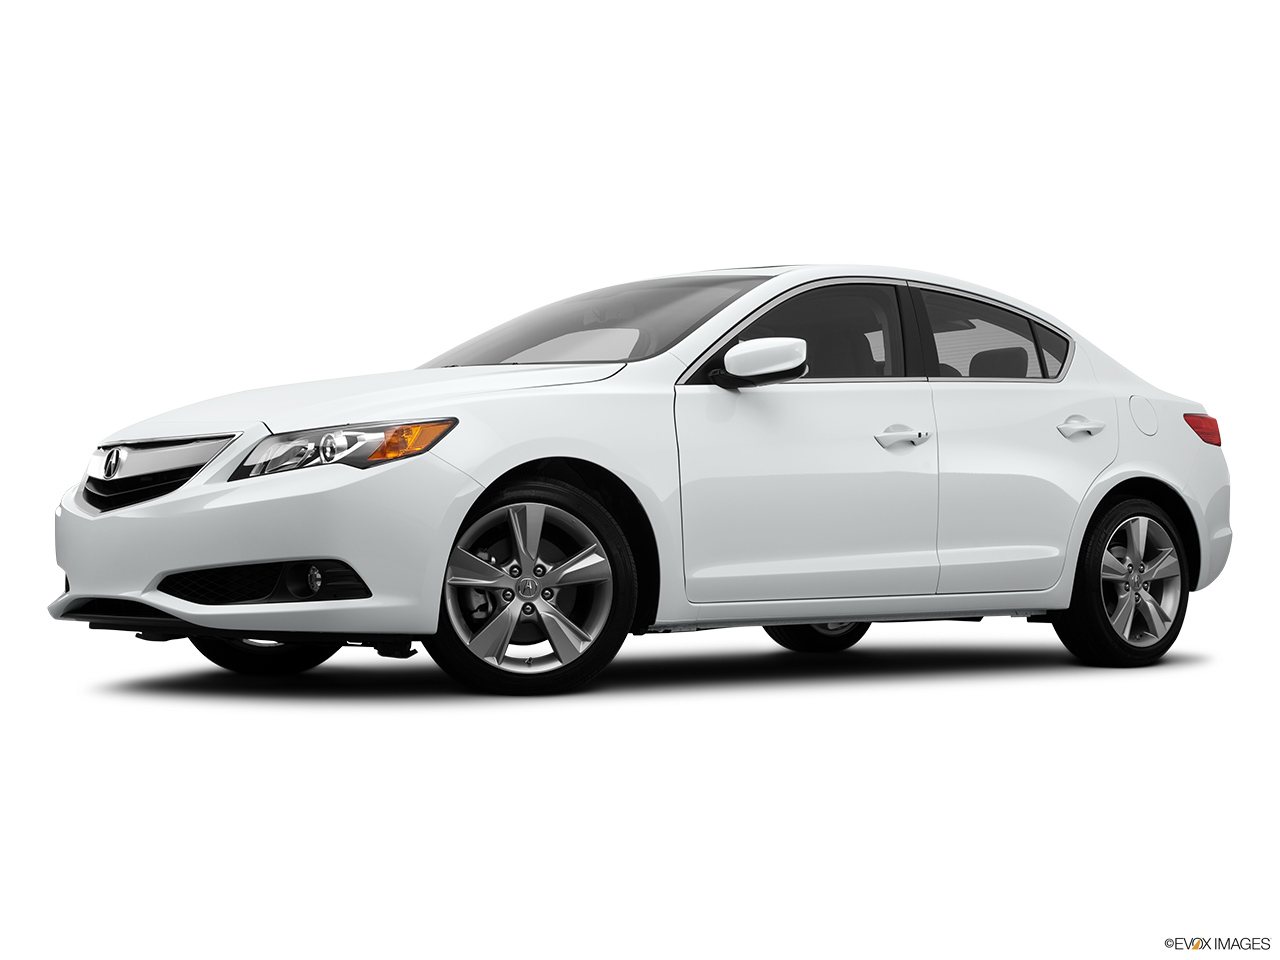 2015 Acura ILX 6-Speed Manual Low/wide front 5/8. 